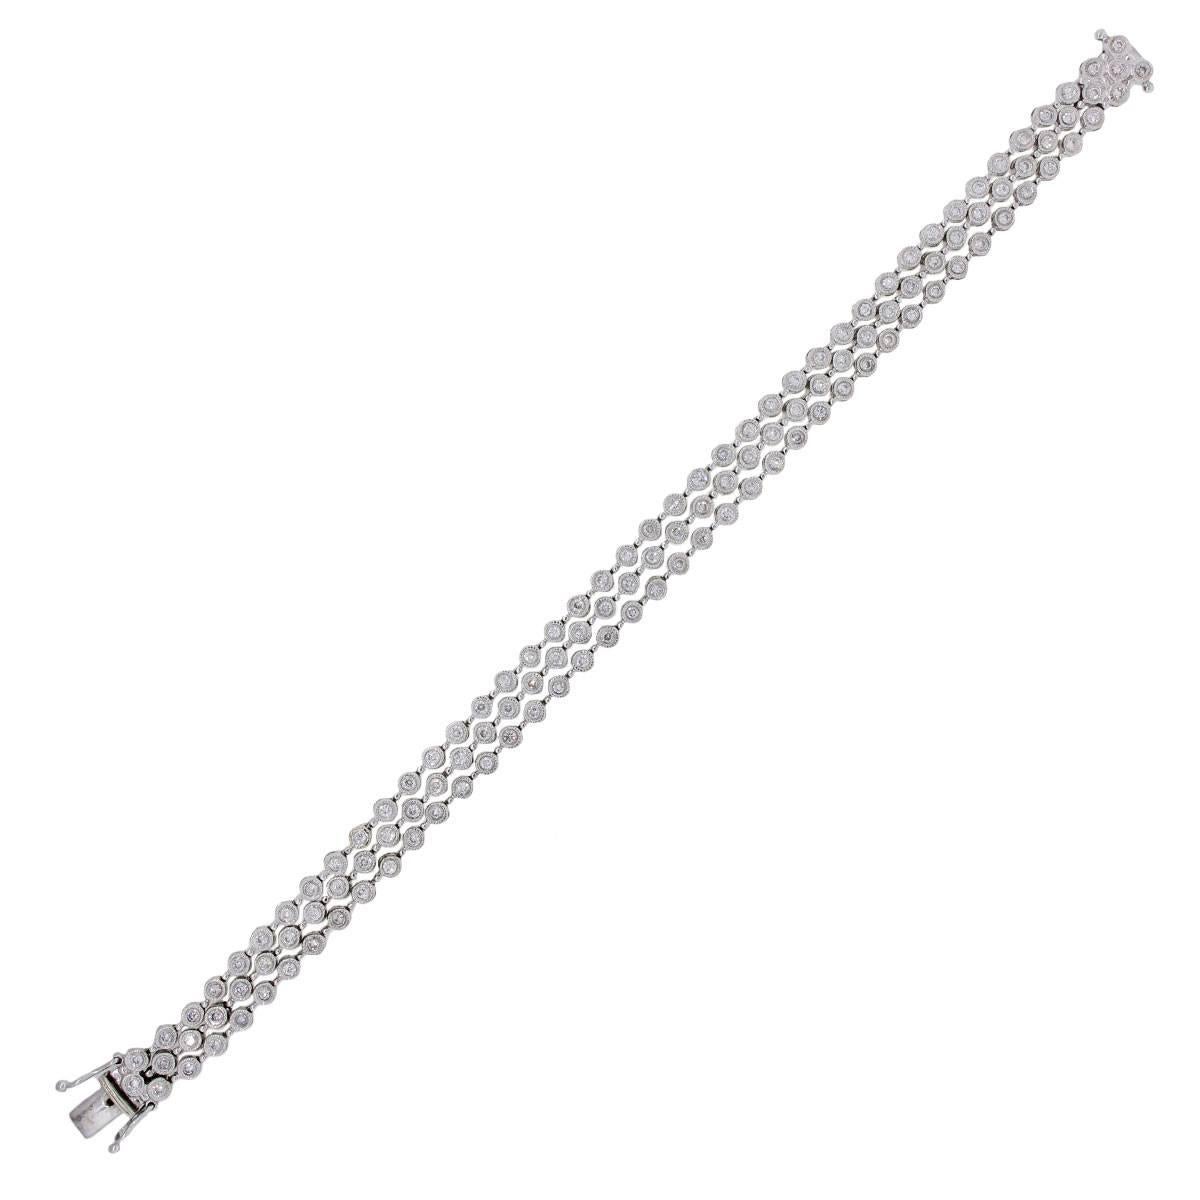 Material: 14k white gold
Diamond Details: Approximately 2ctw of bezel set round brilliant diamonds. Diamonds are I/J in color and SI in clarity
Fastening: Tongue in box clasp with safety latch
Length: 7.25″
Item Weight: 16.9g (10.8dwt)
Additional